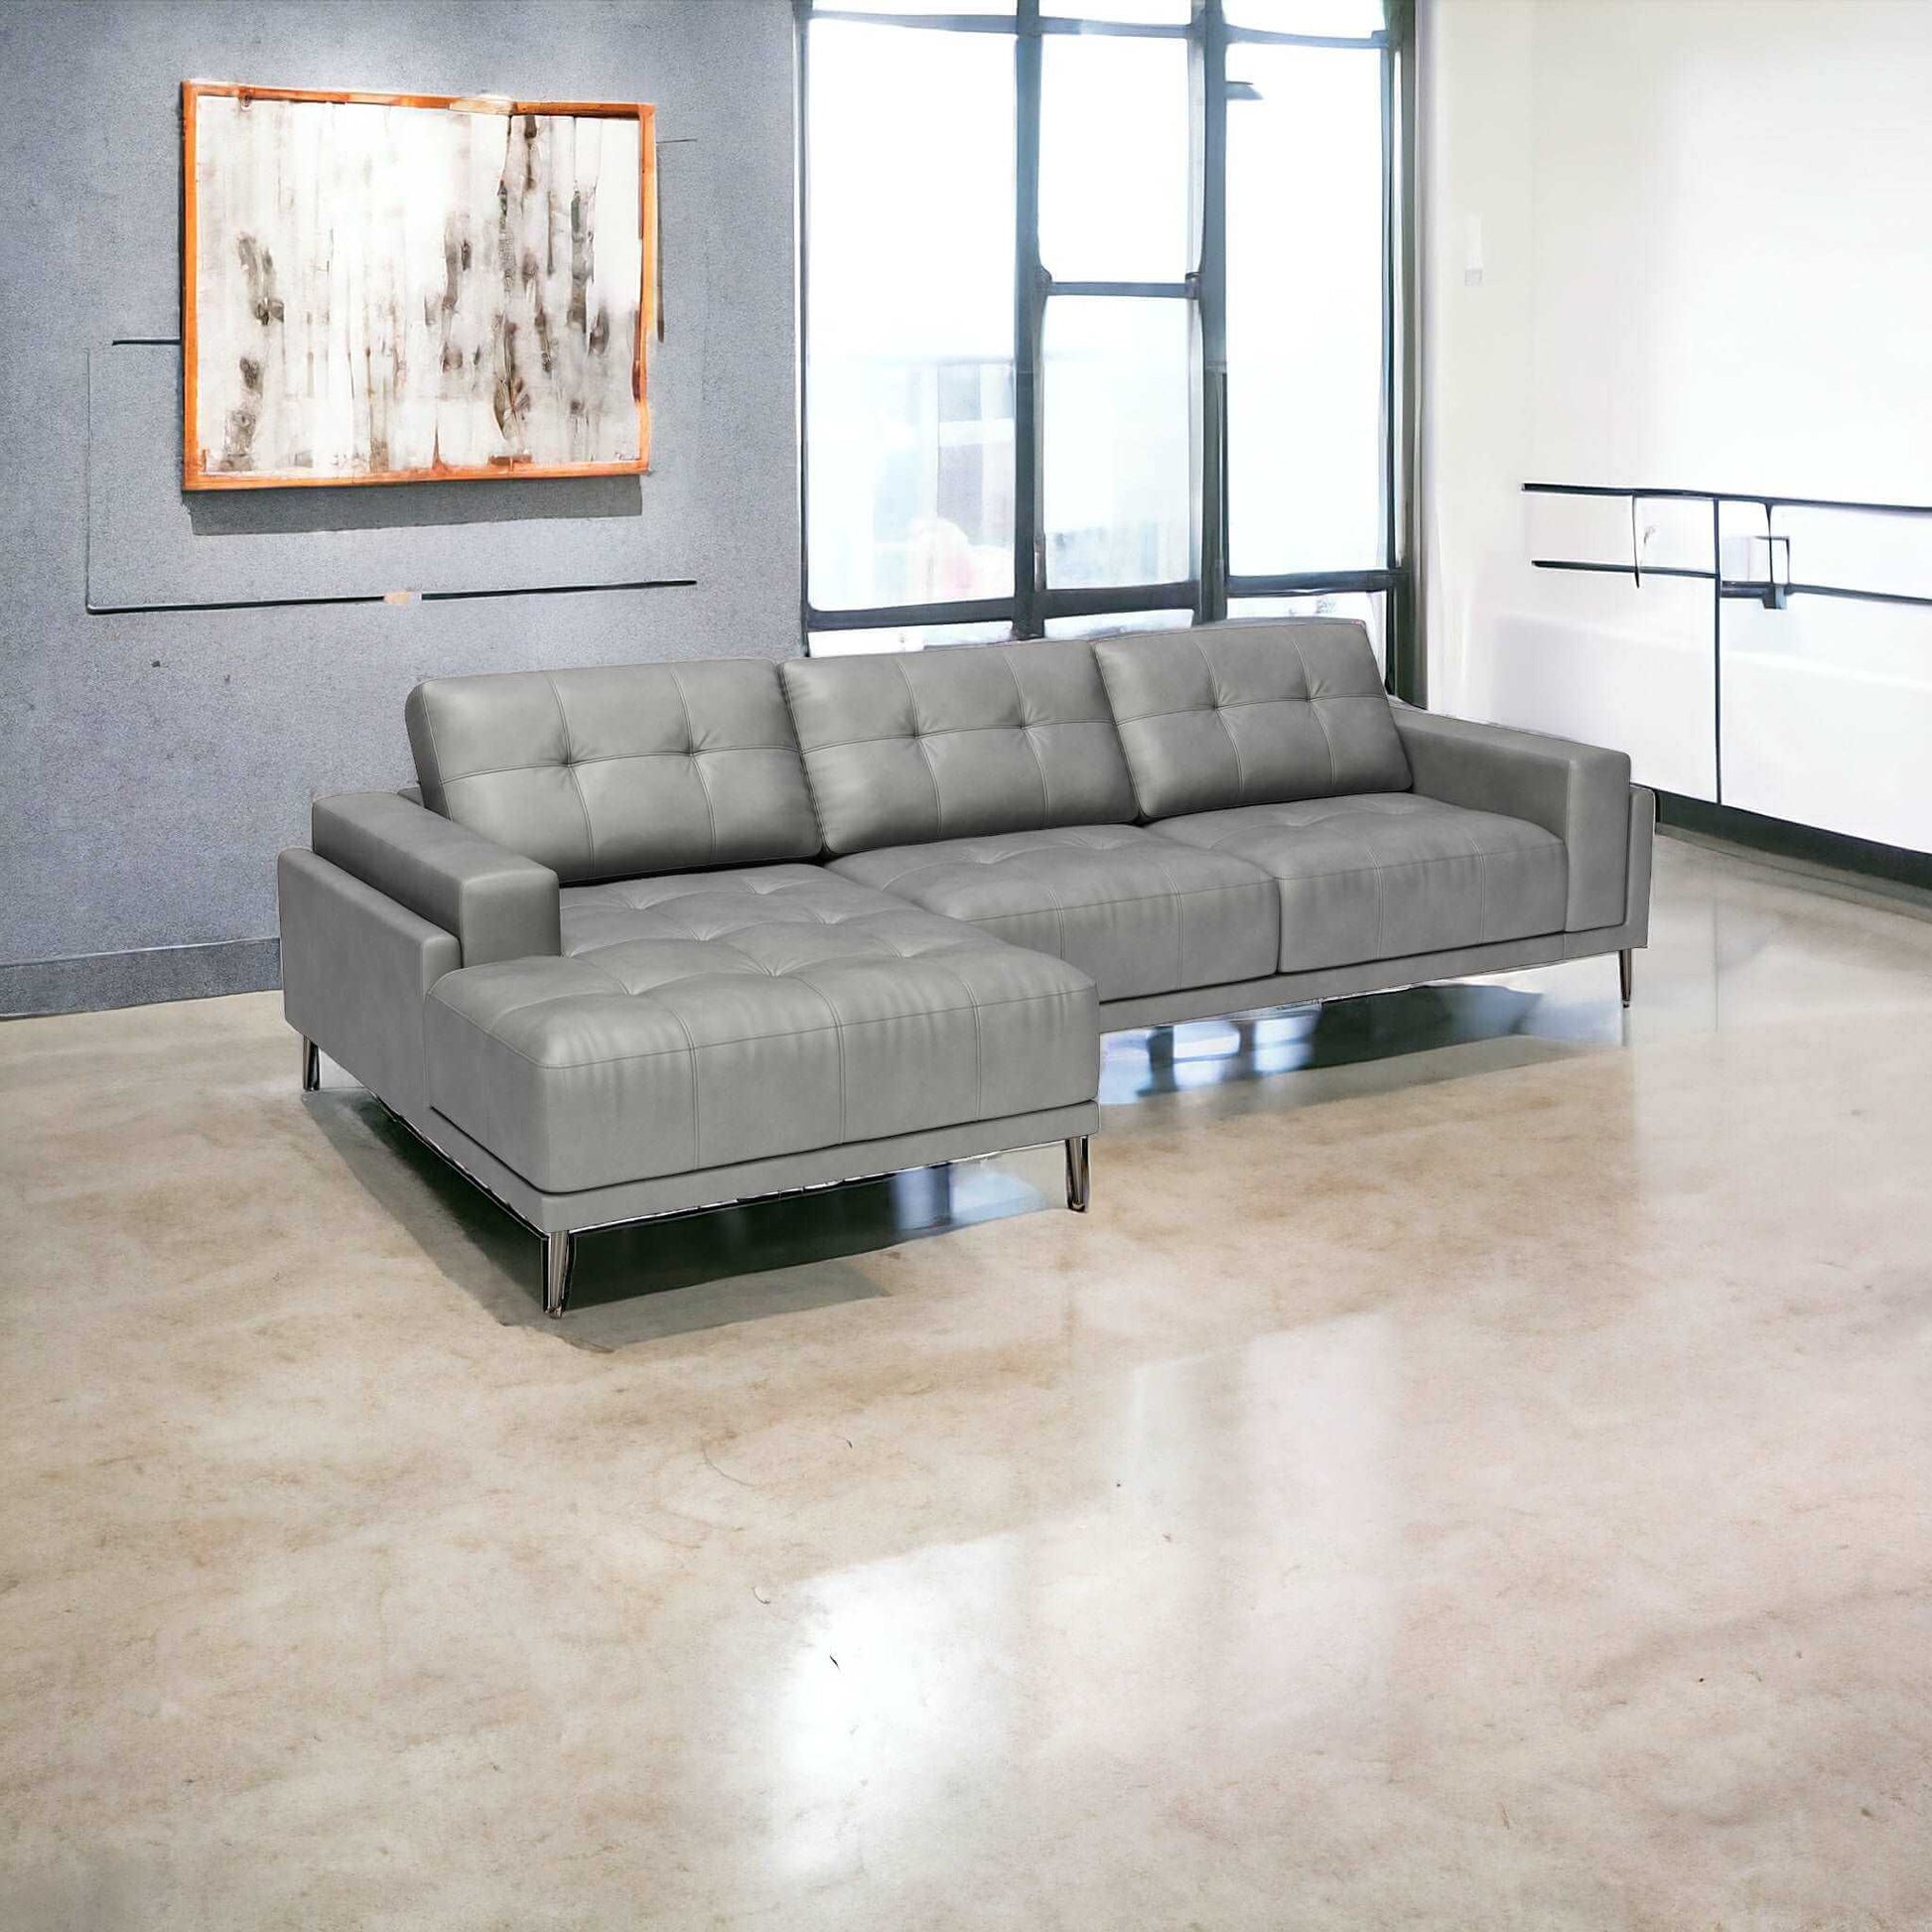 Bliss Leather L-Shape Chaise Sectional Sofa, Beige or Gray 122" - Revel Sofa 